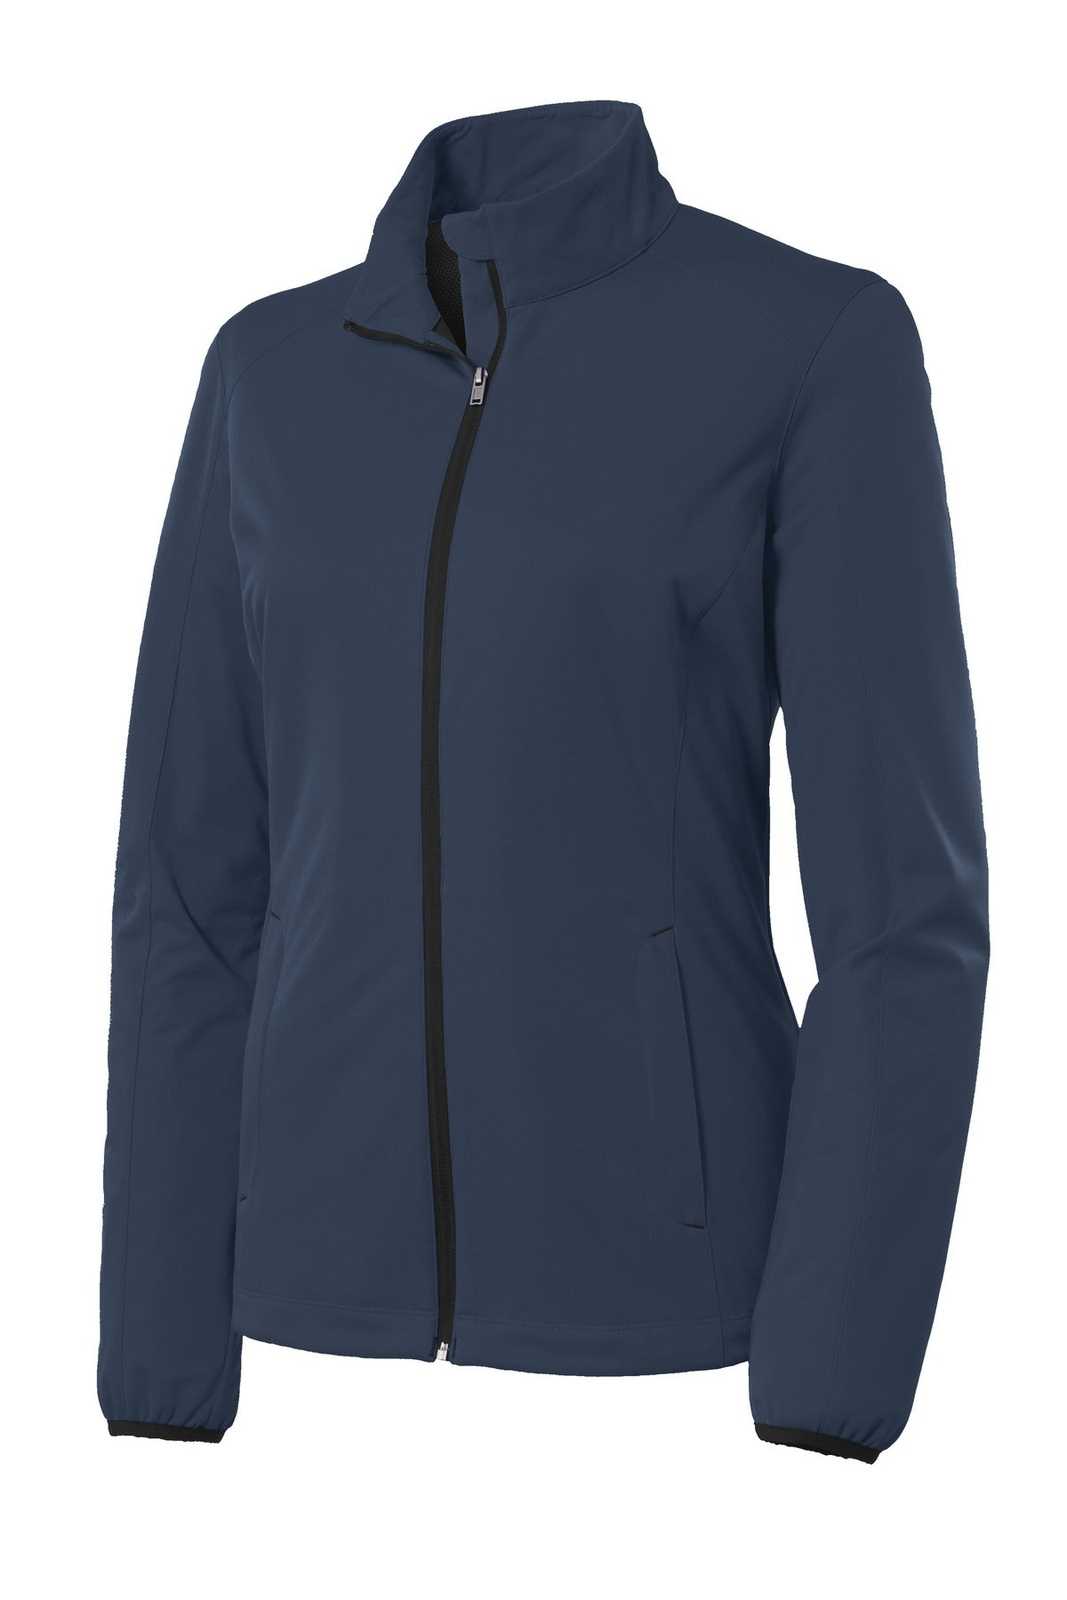 Port Authority L717 Ladies Active Soft Shell Jacket - Dress Blue Navy - HIT a Double - 5